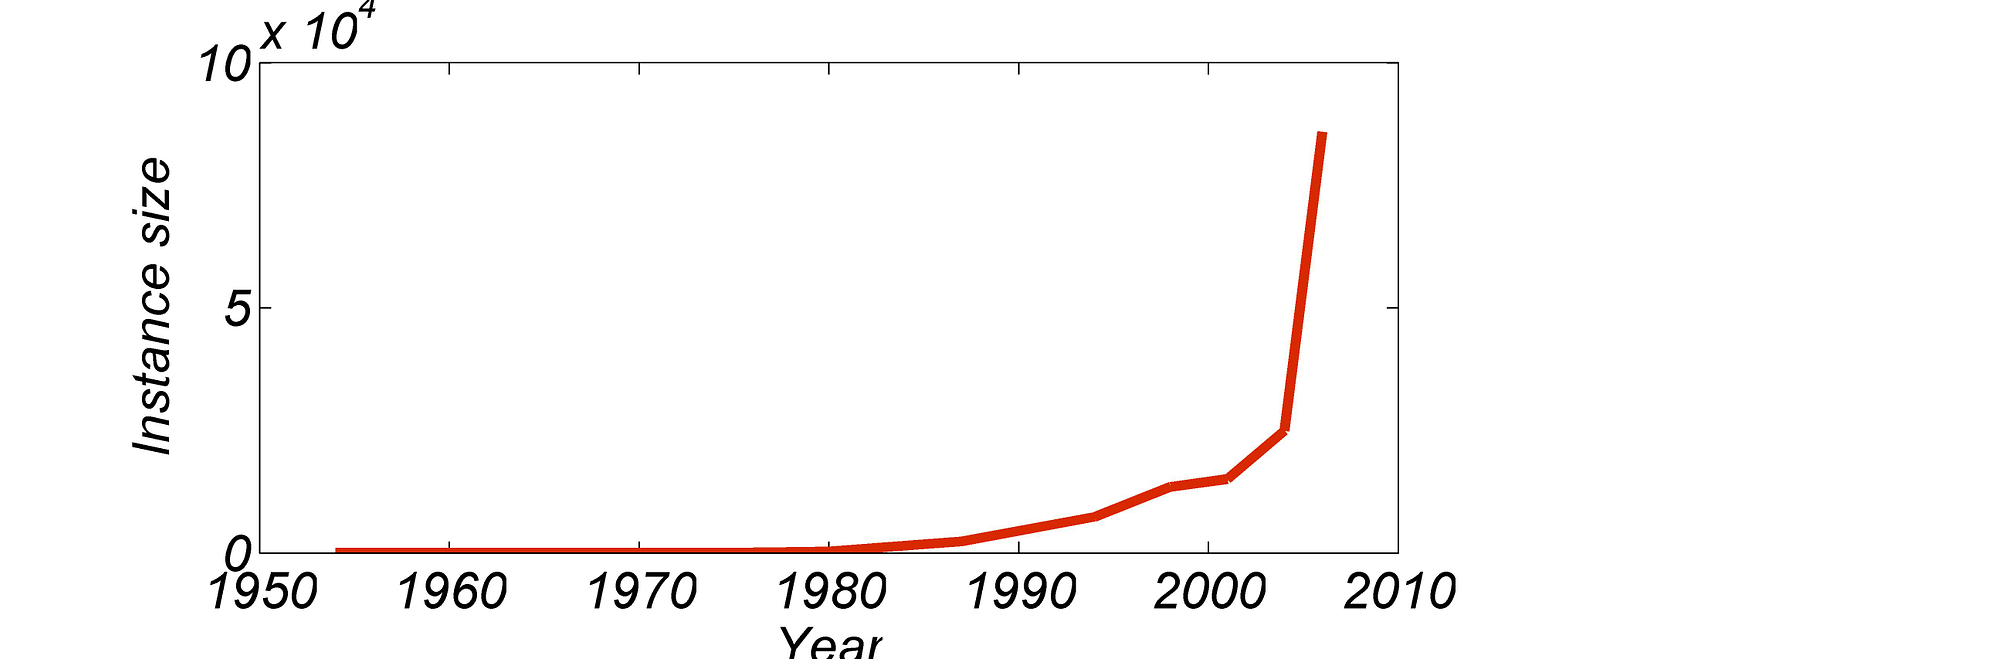 Figure 1: TSP milestones throughout the years